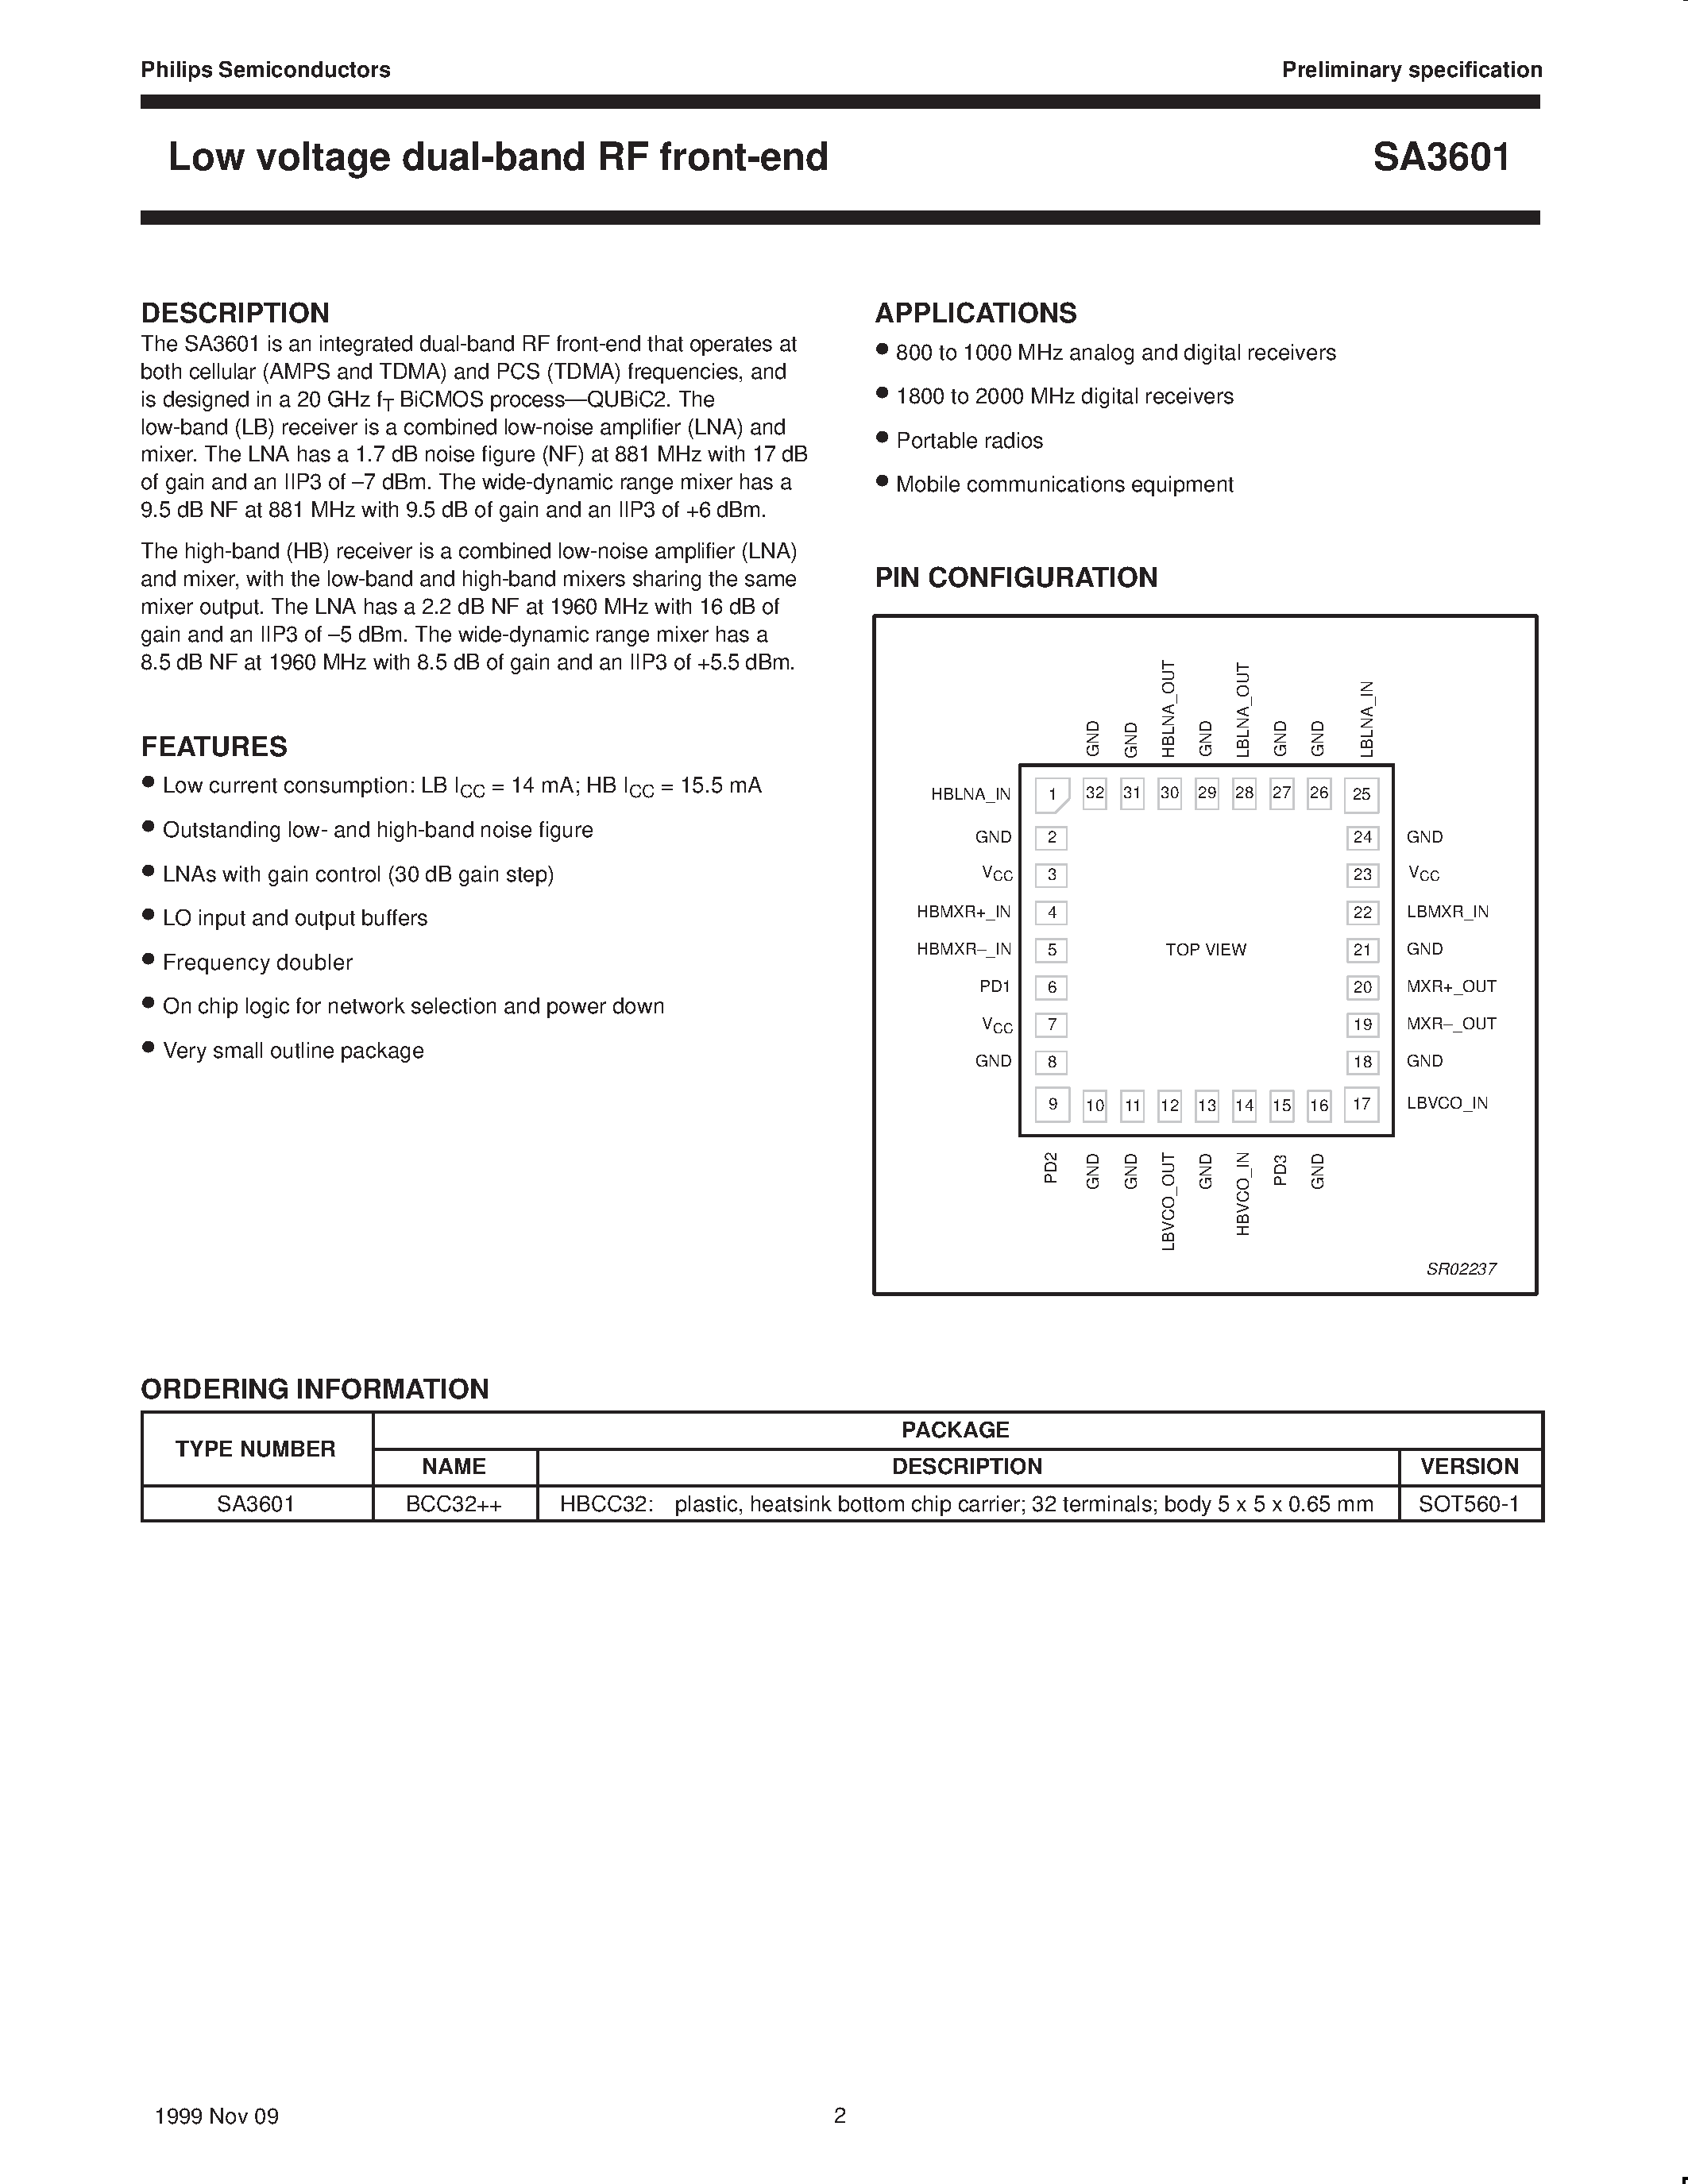 Datasheet SA3601 - Low voltage dual-band RF front-end page 2